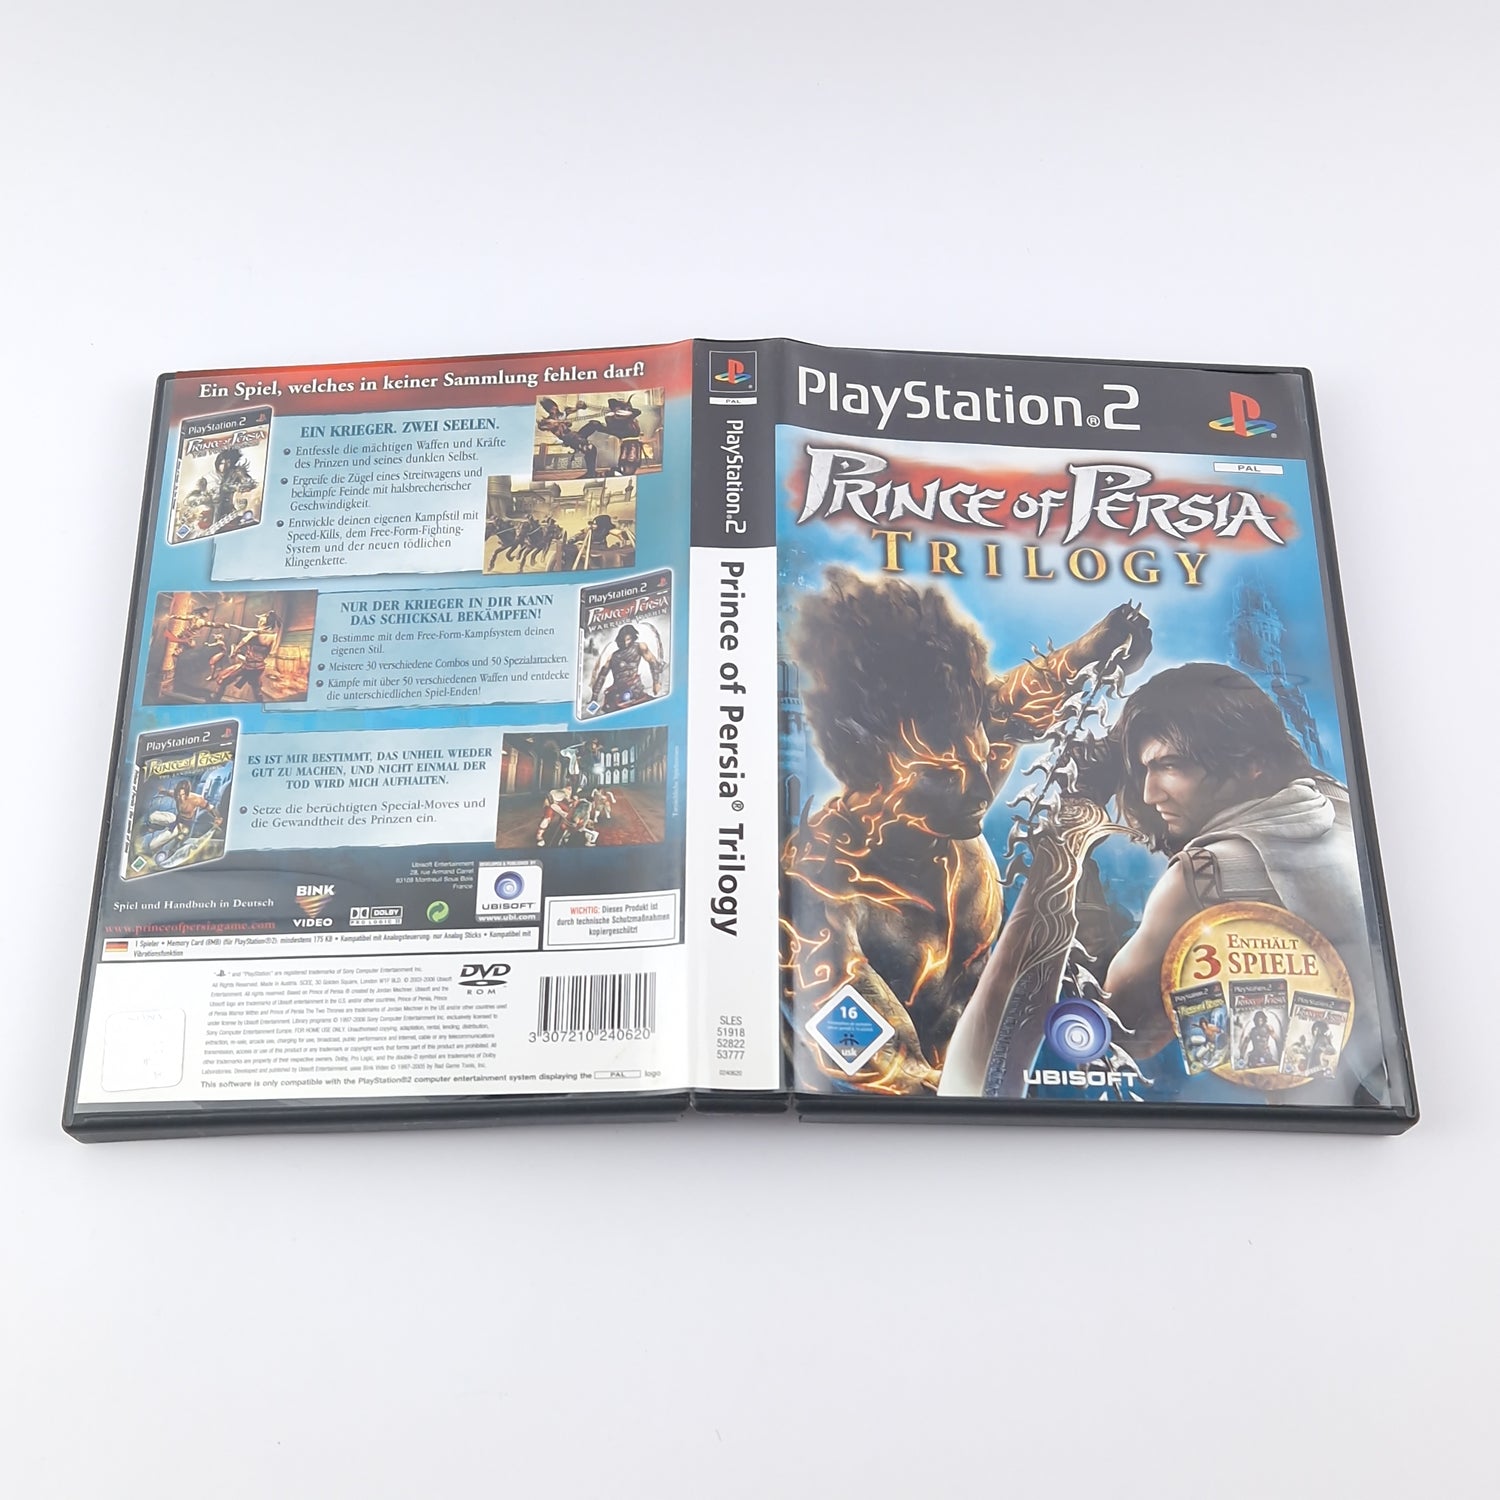 Sony Playstation 2 Game: Prince of Persia Trilogy - OVP Instructions CD | PAL PS2